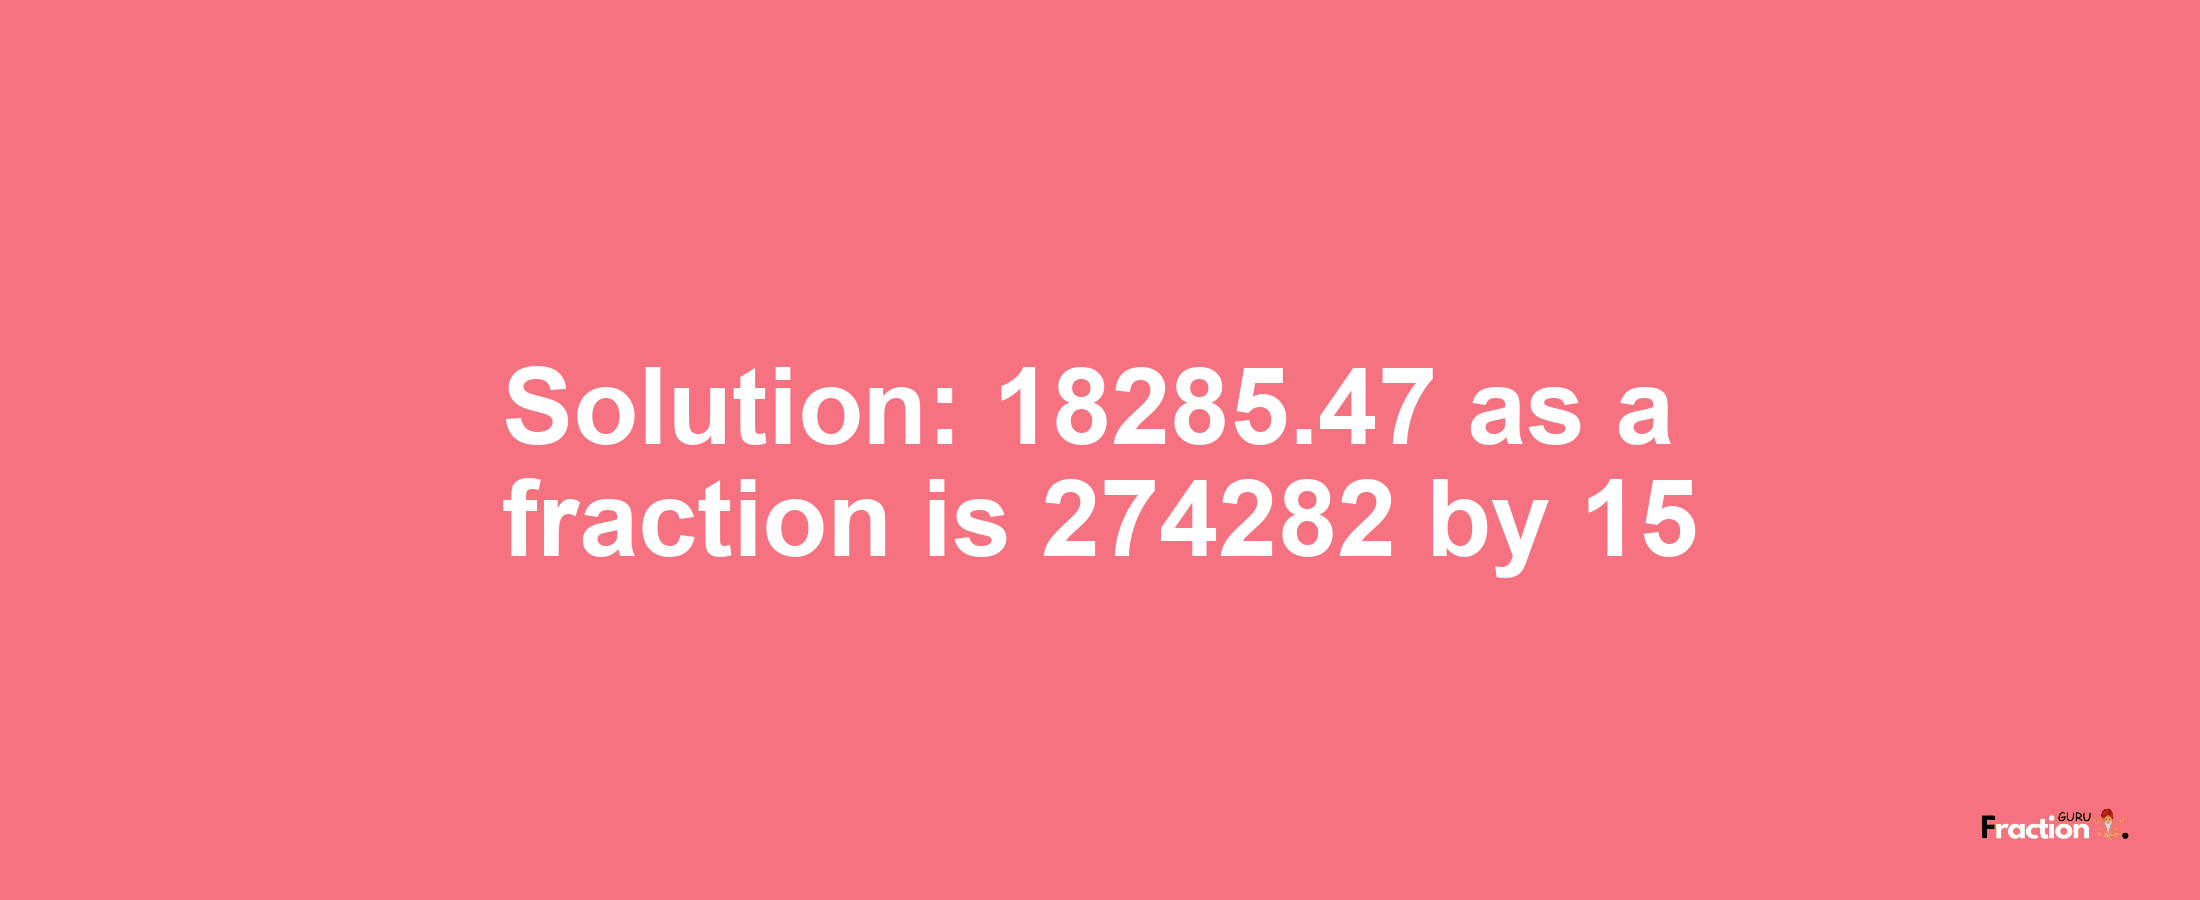 Solution:18285.47 as a fraction is 274282/15